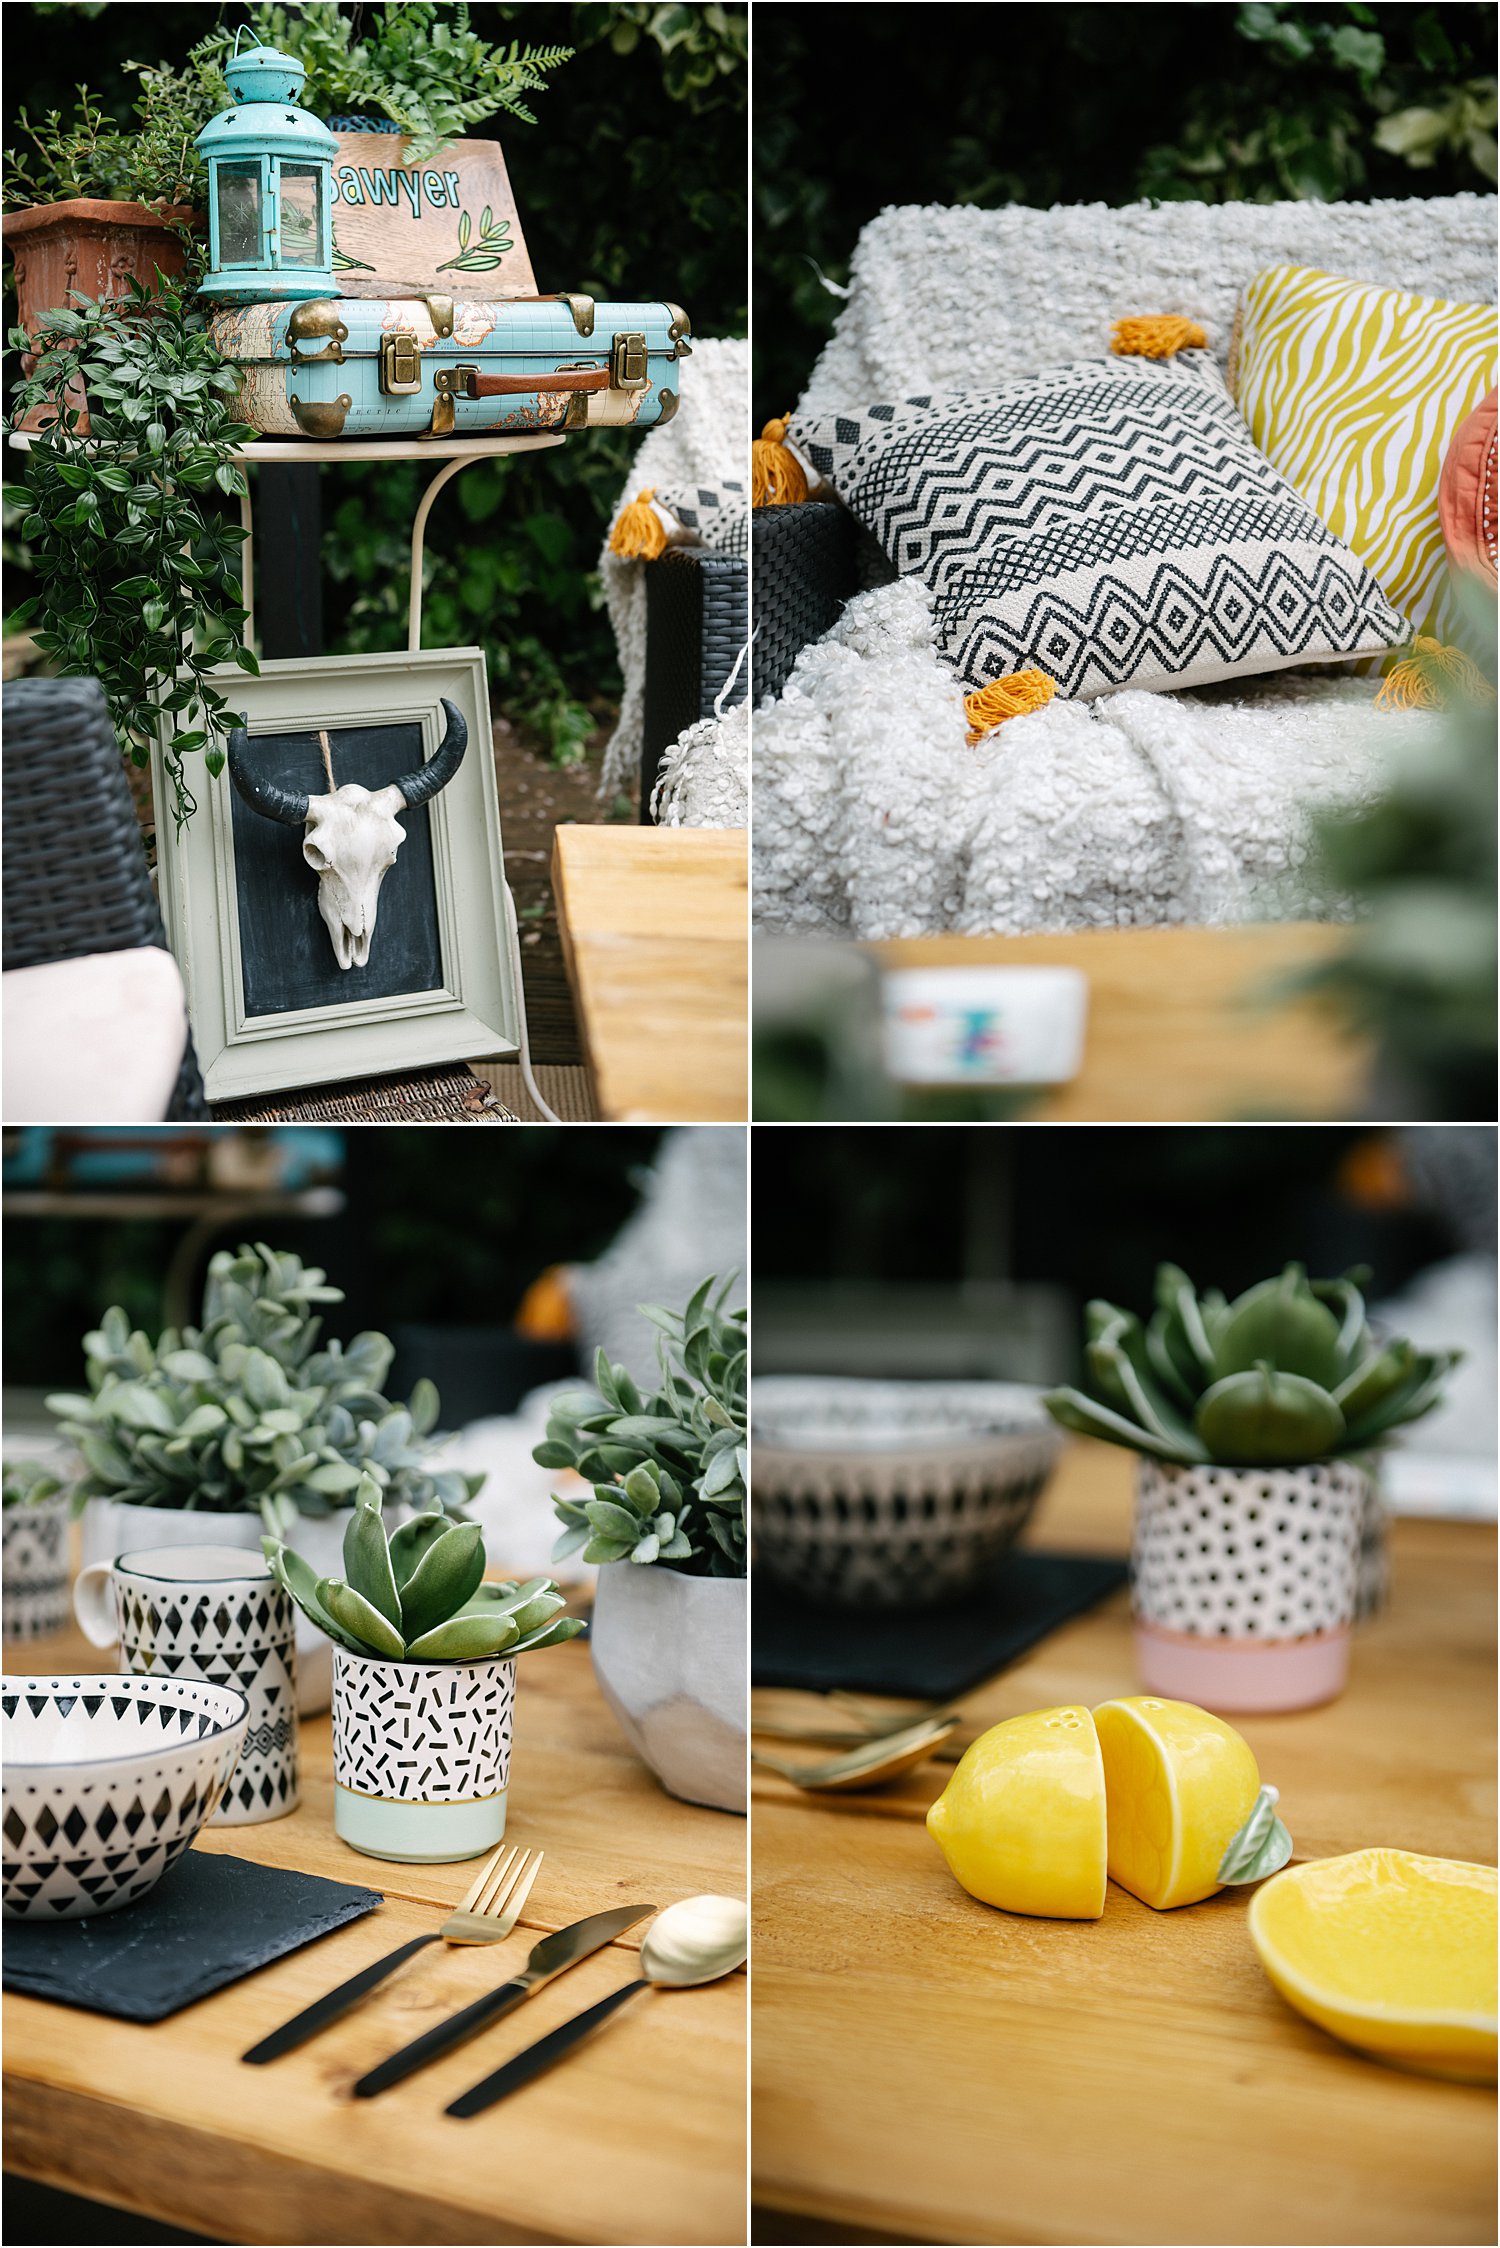 outdoor-garden-indoor-table-styling-sass-and-belle-layered-home-eclectic-interiors-lily-sawyer-photo